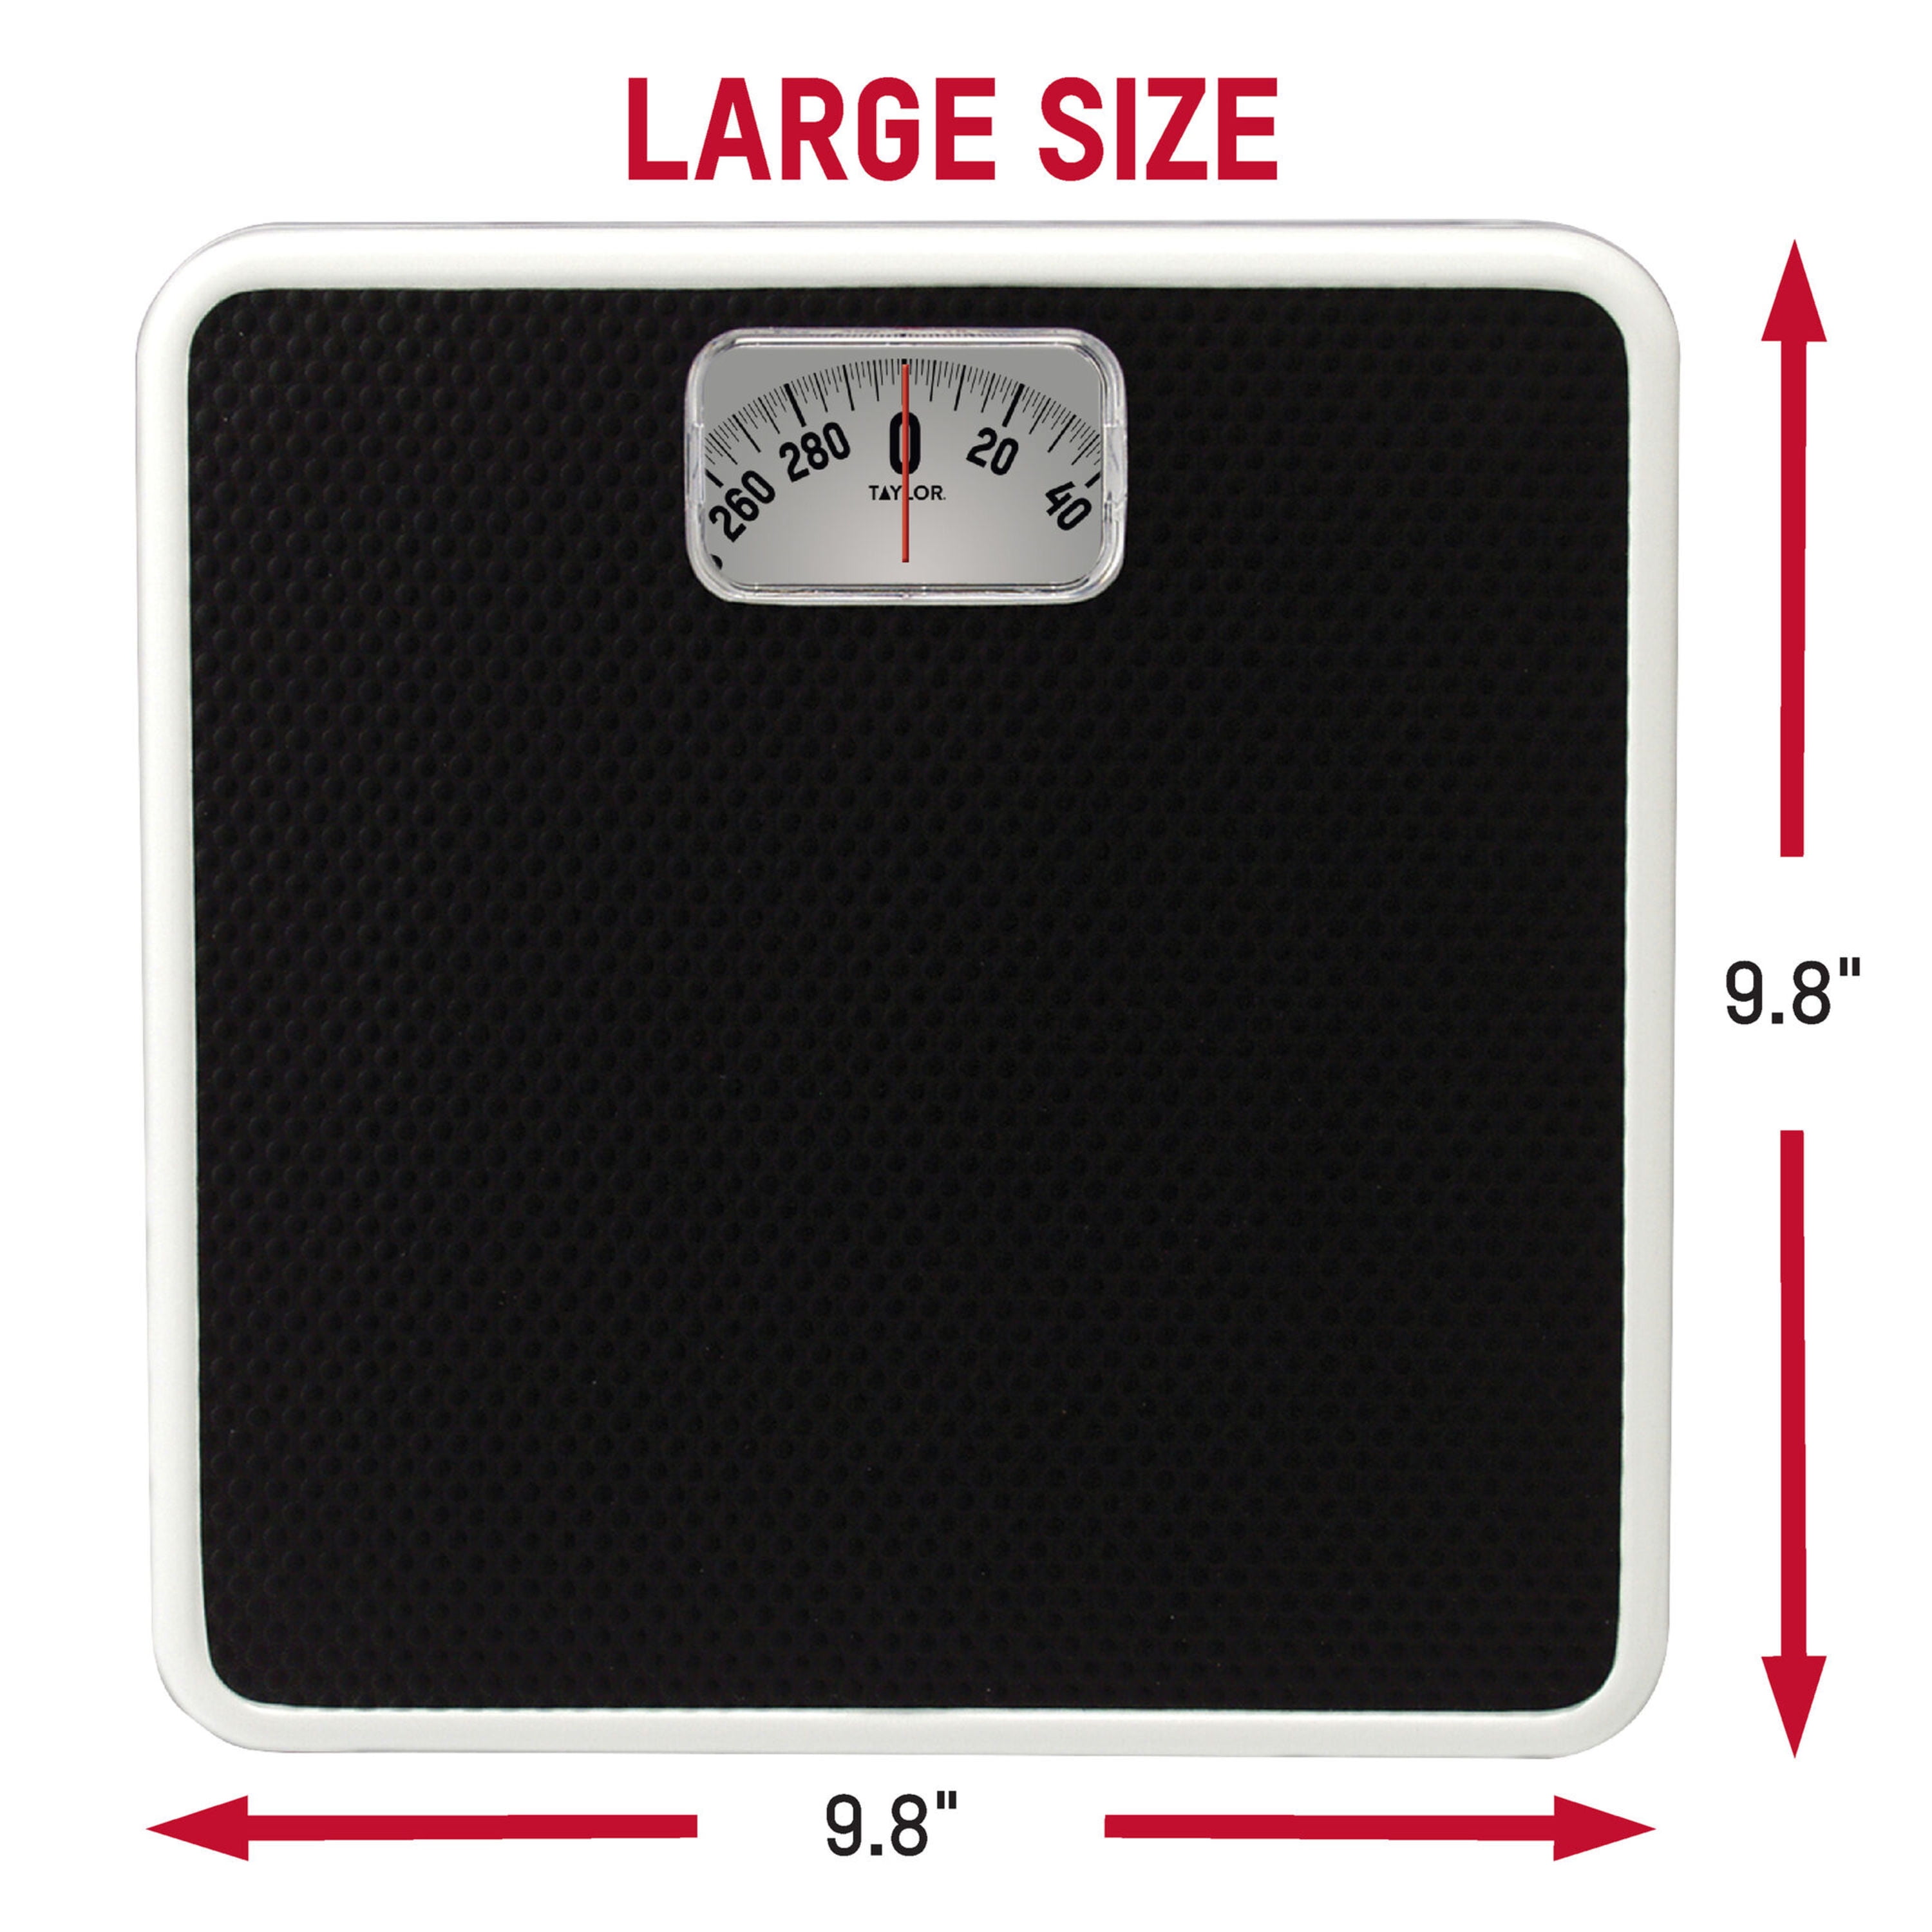 Taylor Analog Scales for Body Weight, Rotating Dial, 300 LB Capacity, Black  Textured Mat with Durable Metal Platform, Easy to Clean, 10.0 x 10.0